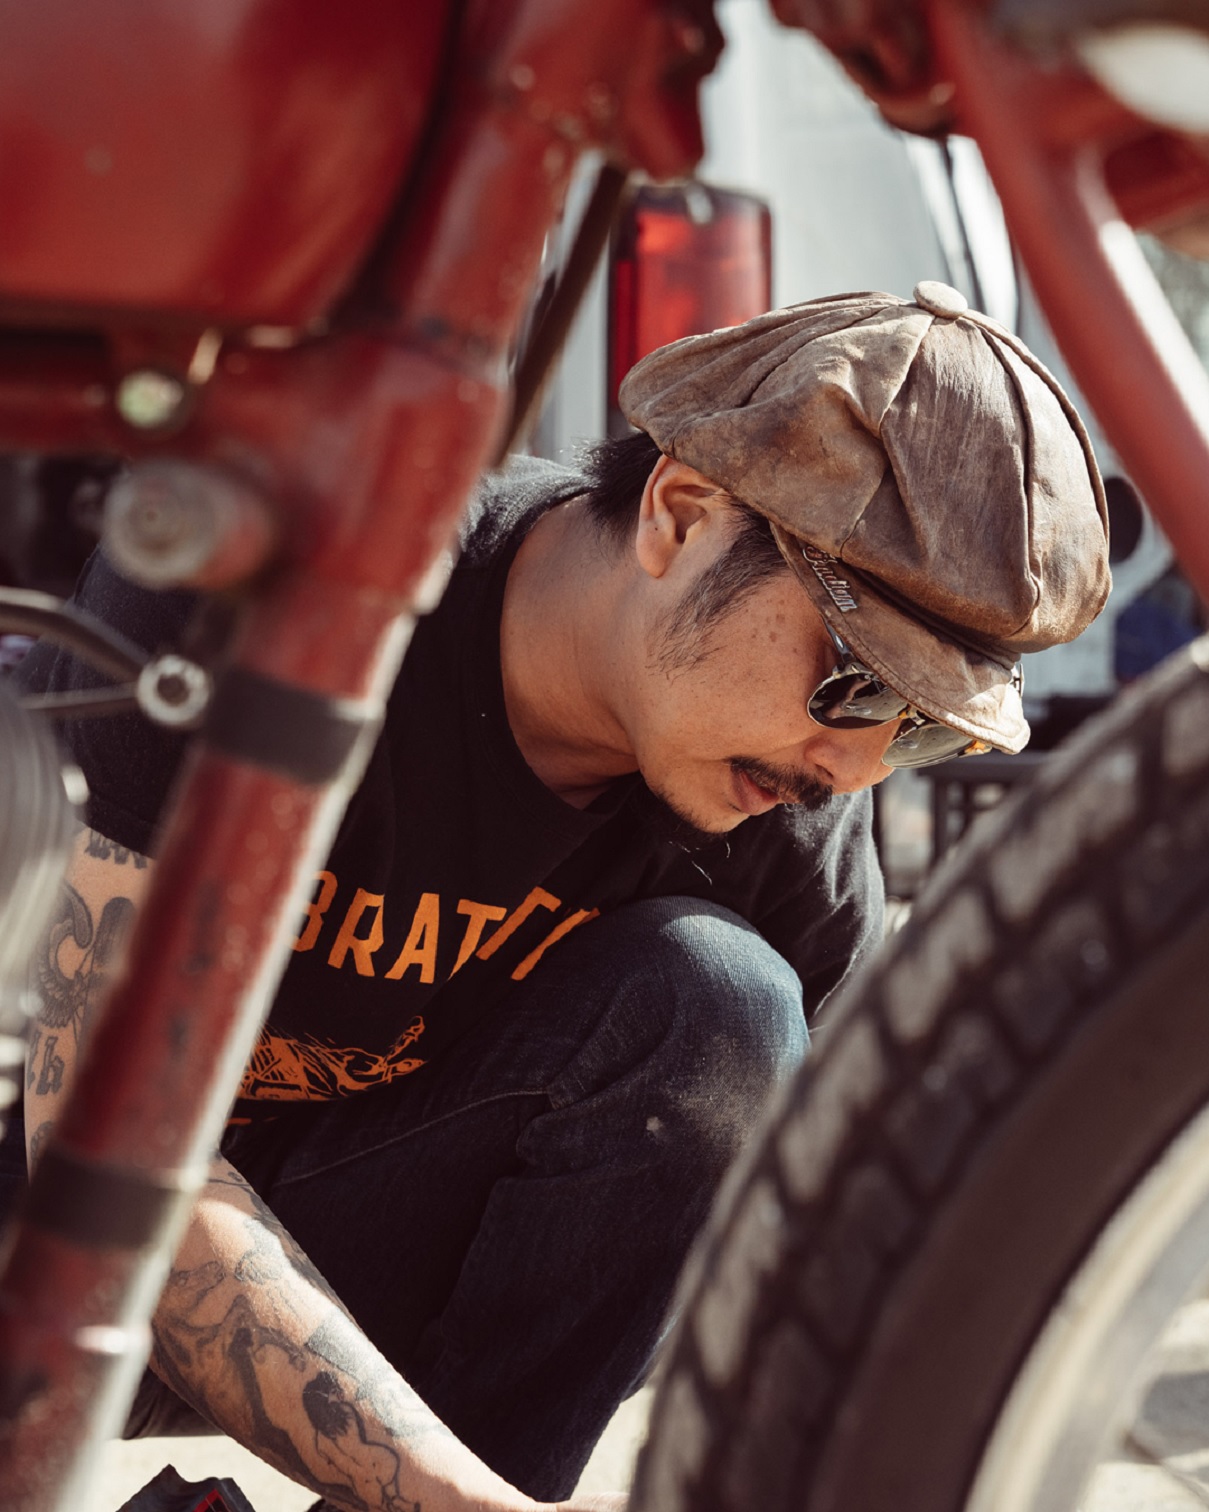 Brat Style founder and bike builder Go Takamine with a red vintage Indian